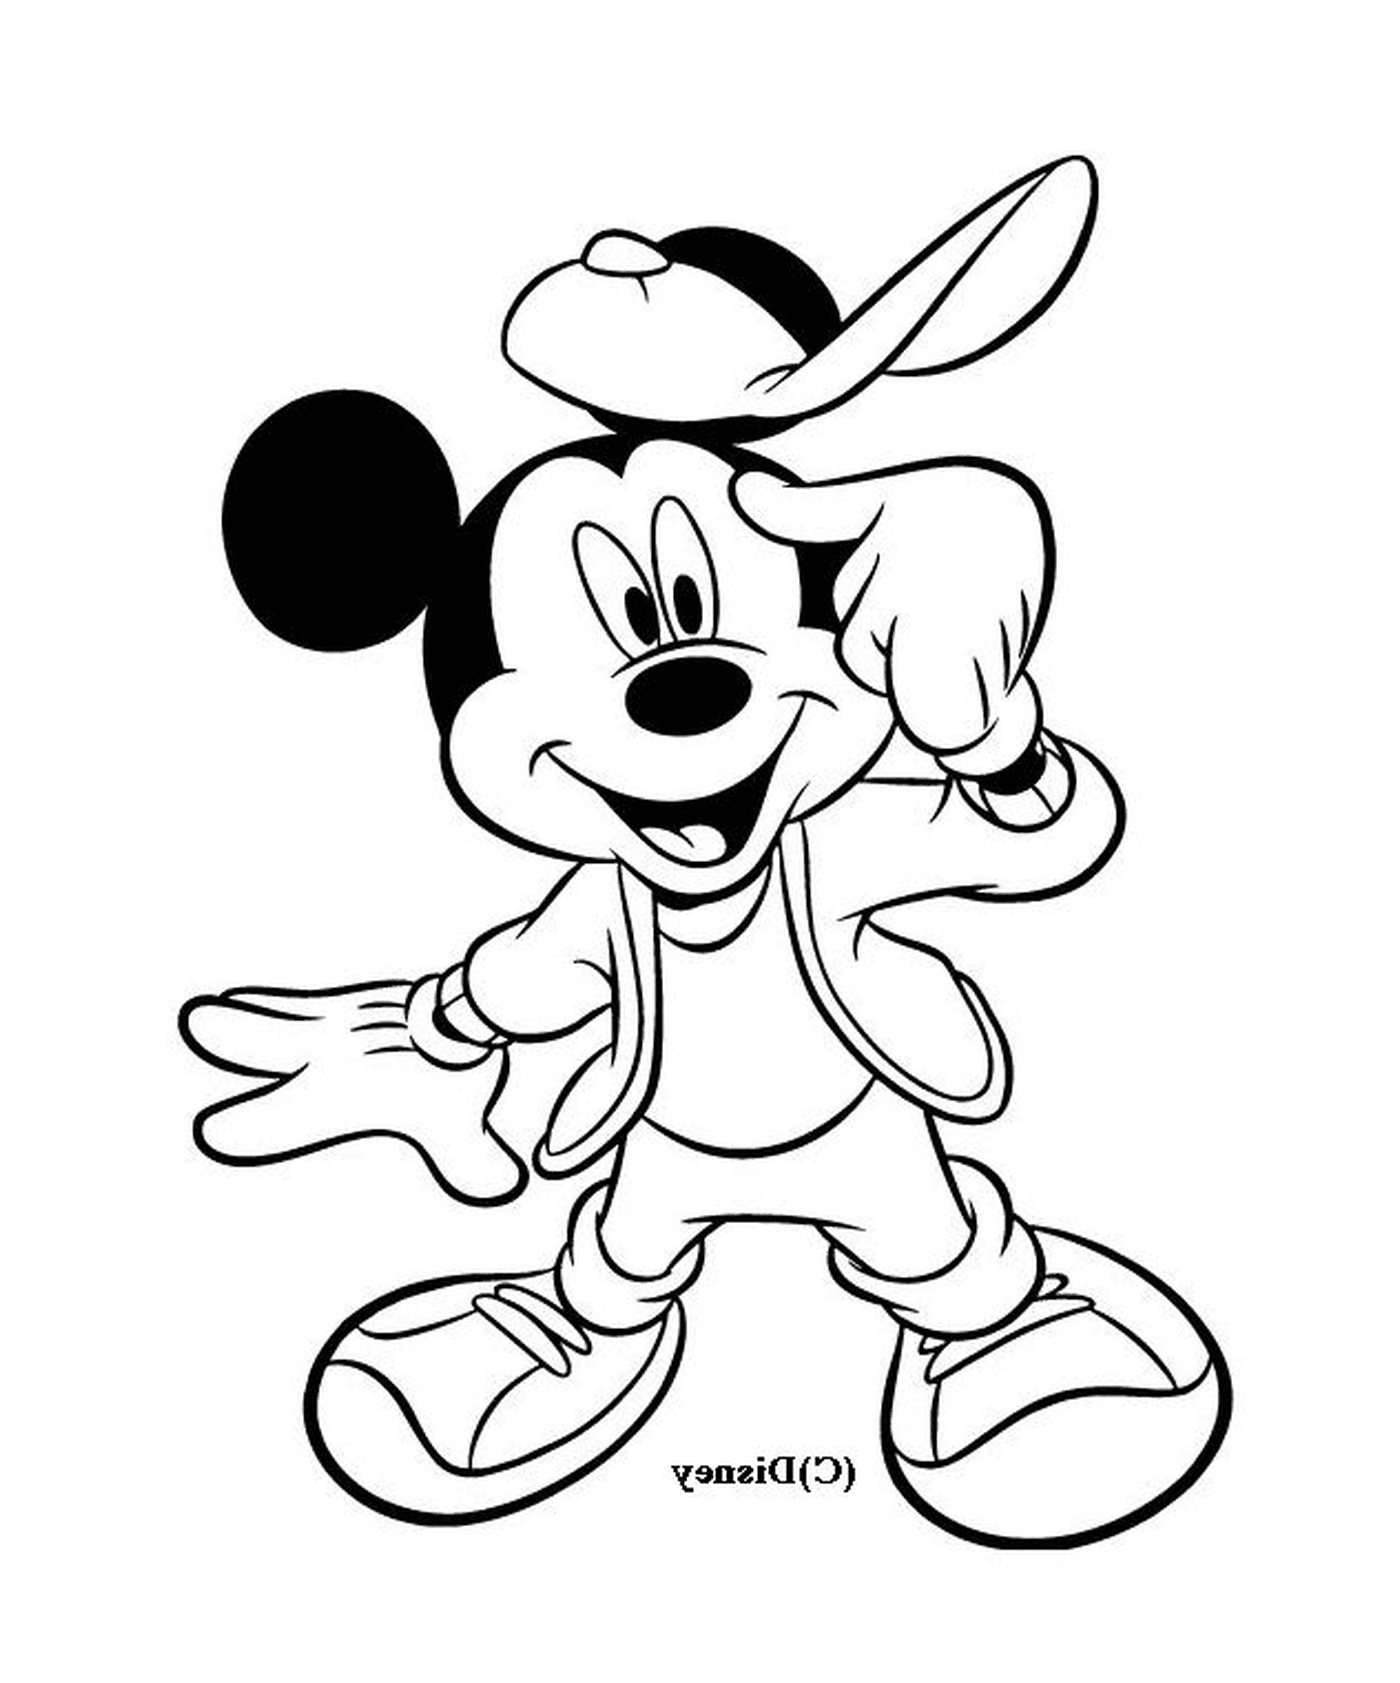  Mickey Mouse with a rabbit hat 